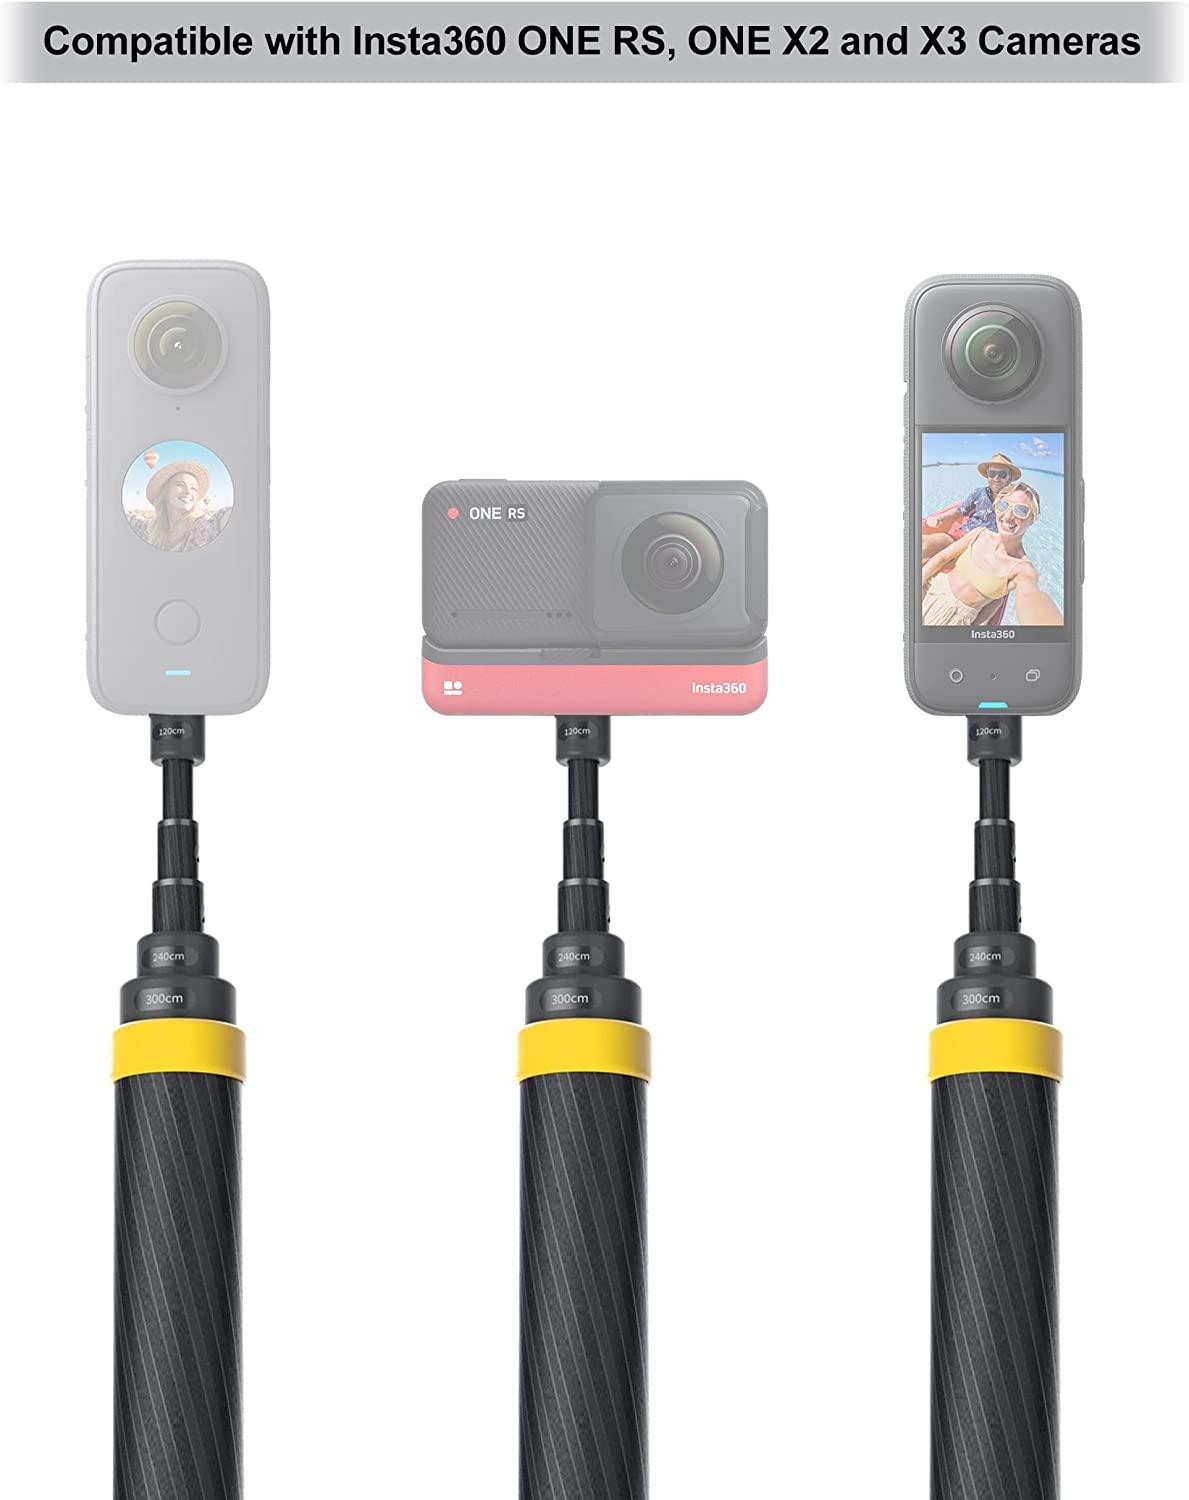 Insta 3m 9.8ft Extended Edition Selfie Stick for ONE X2, ONE R